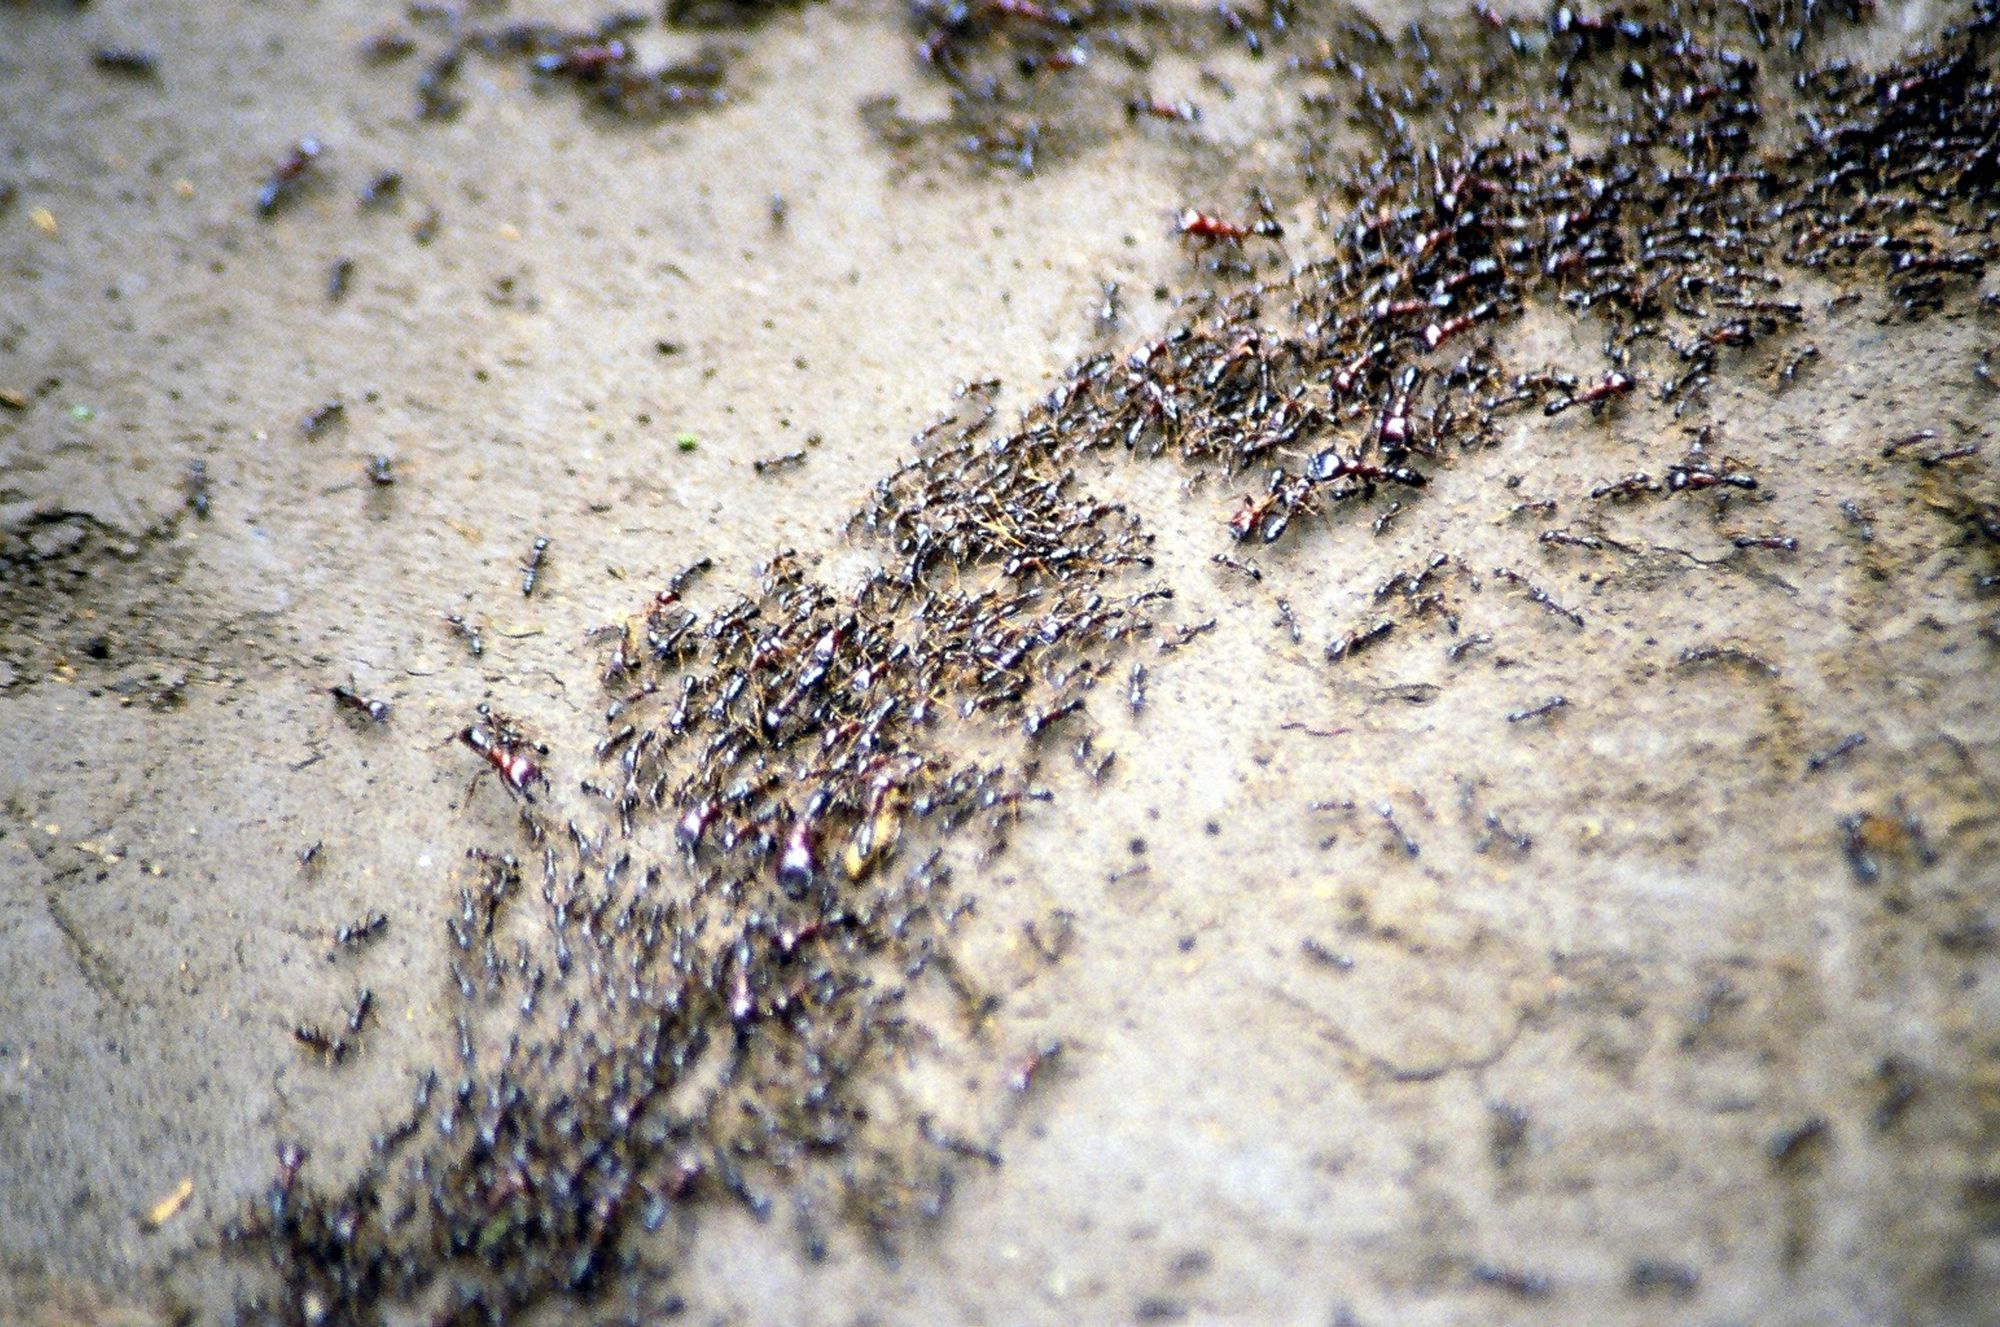 a macro look at what looks like a big river of ants on the ground